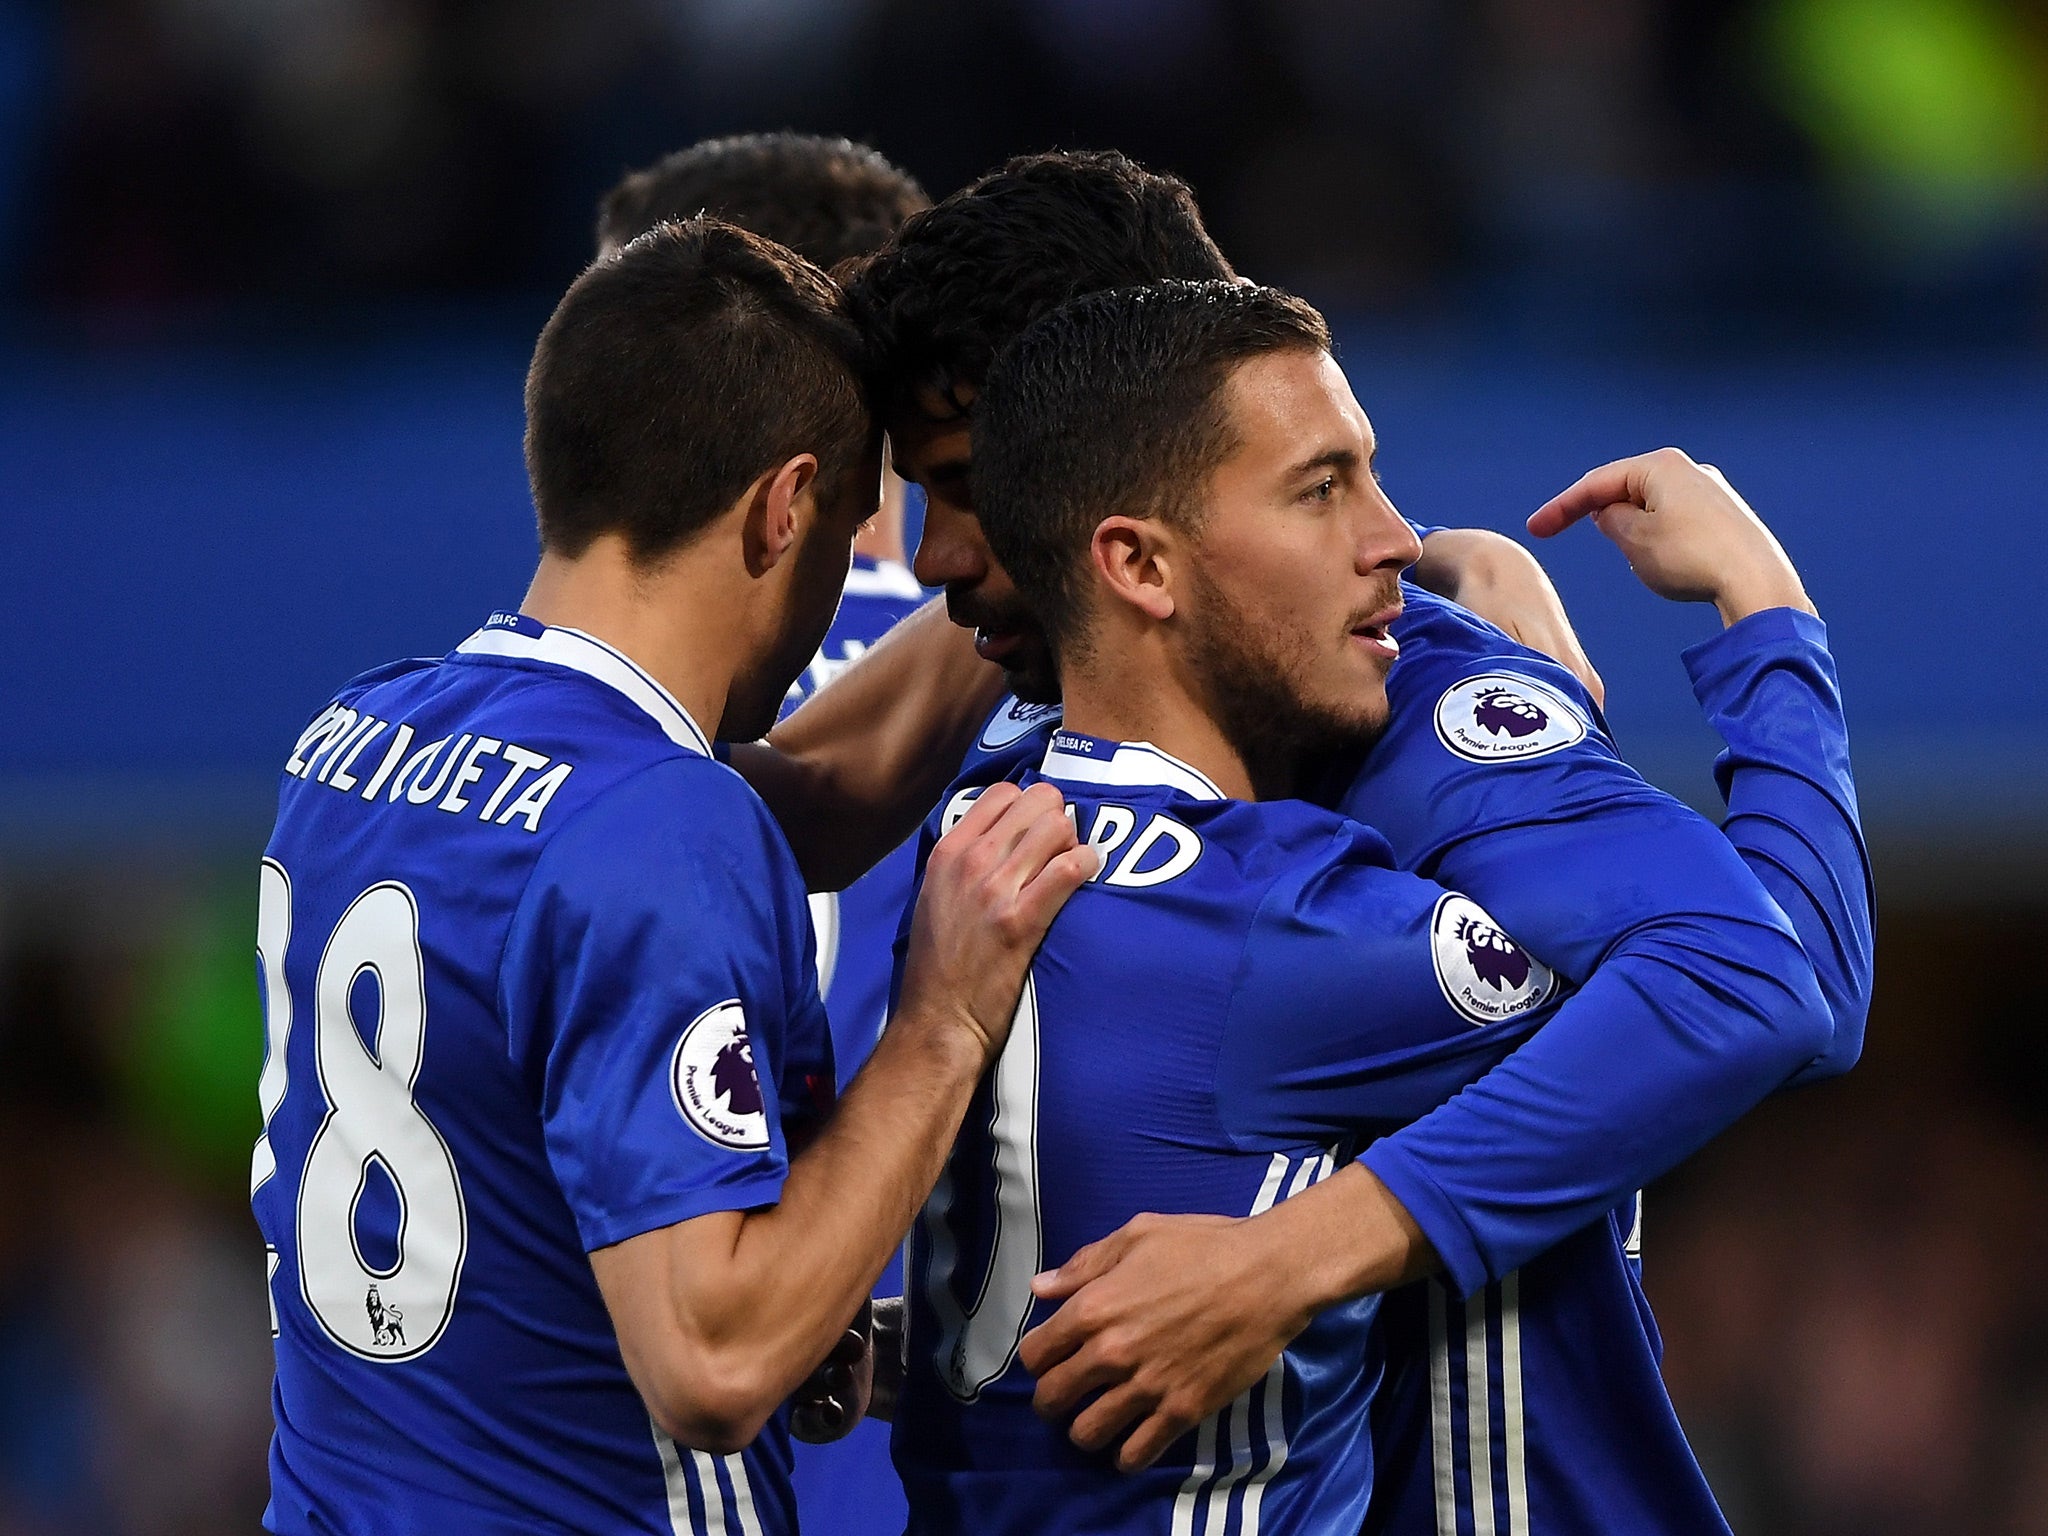 Chelsea were comfortable in victory, despite letting in two sloppy goals